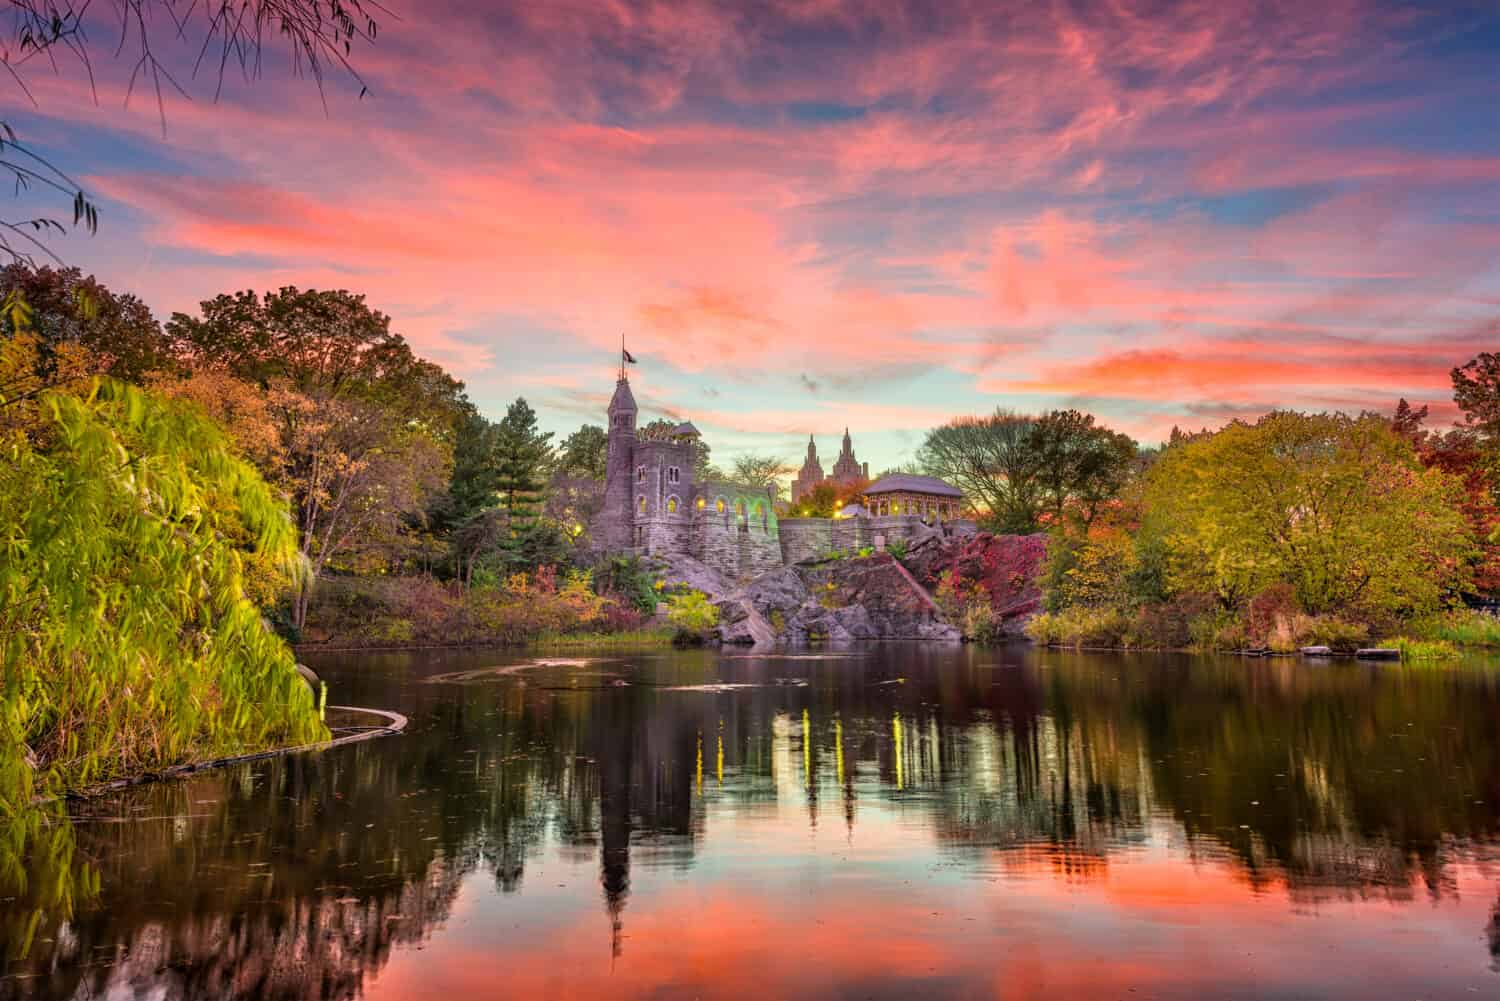 Central Park, New York City at Belvedere Castle during an autumn twilight.